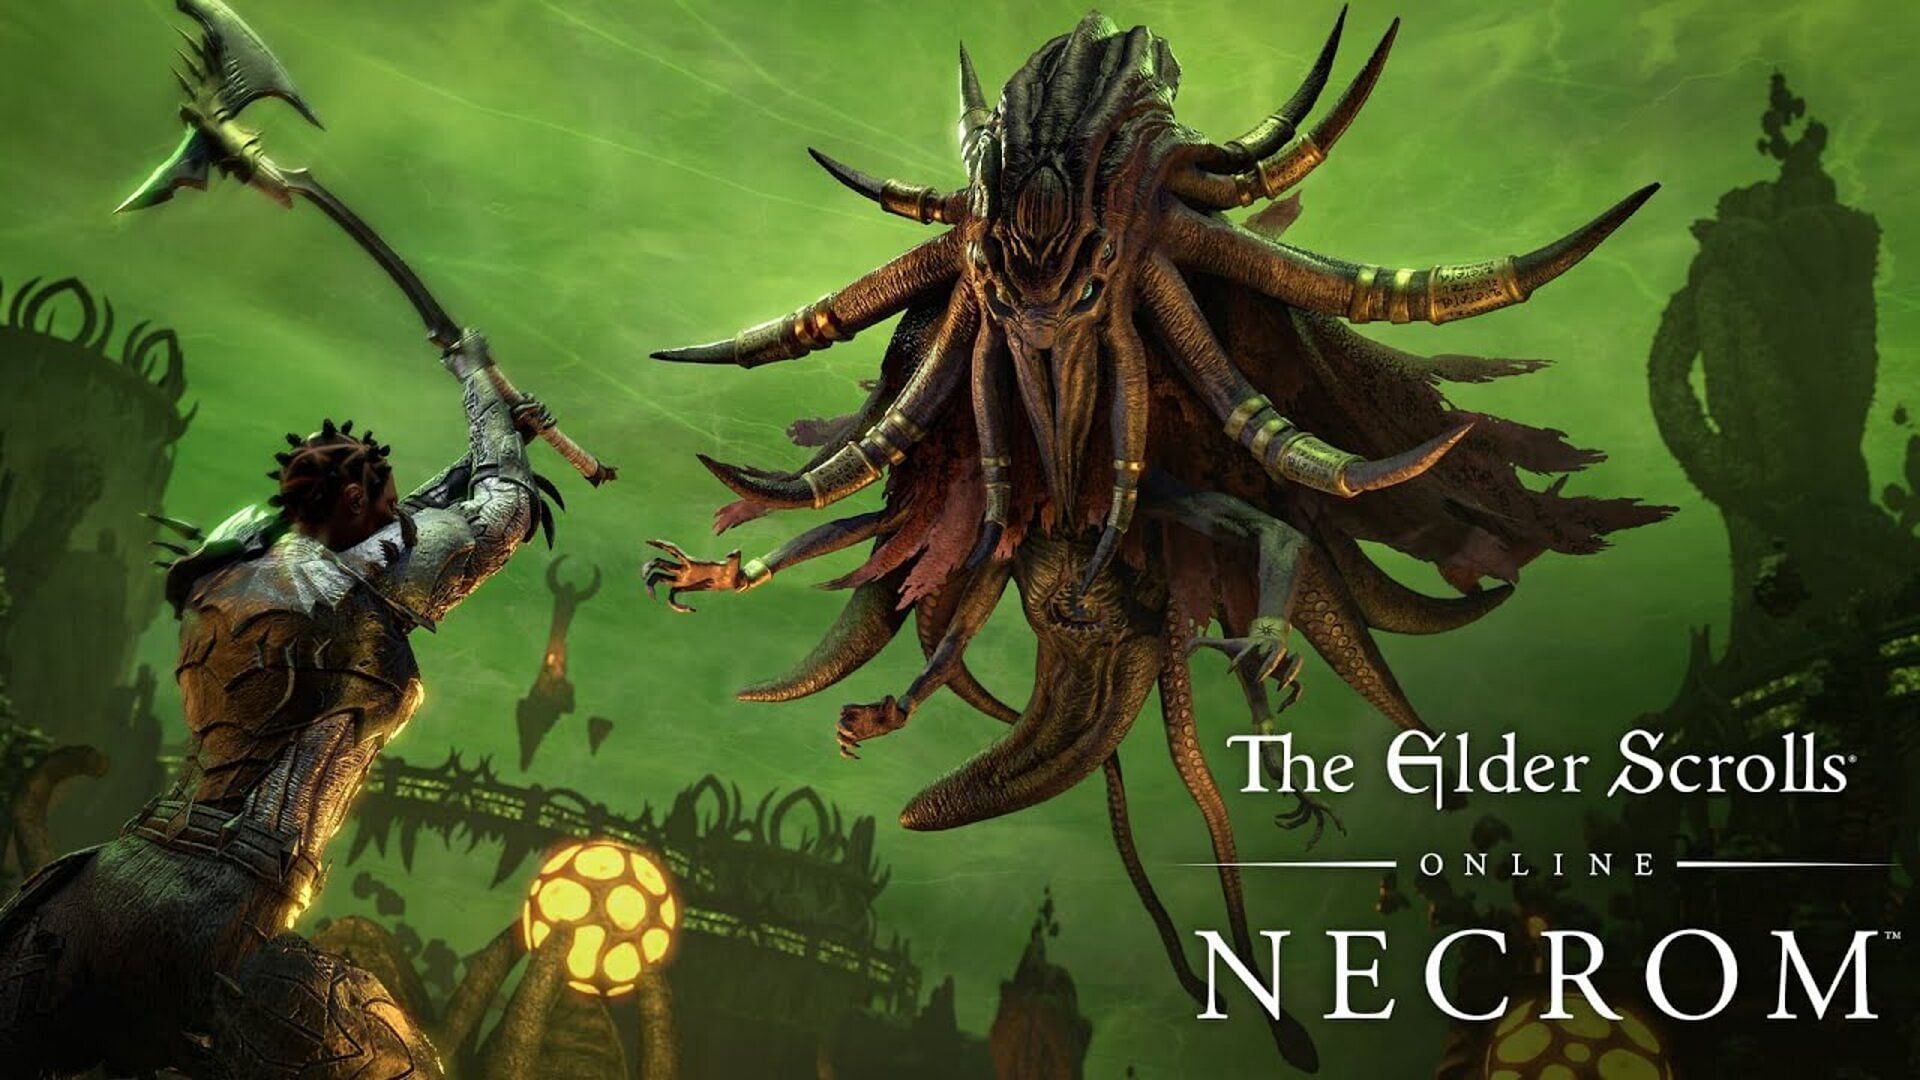 The latest update to Elder Scrolls Online allow players to visit Necrom (Image via Bethesda)